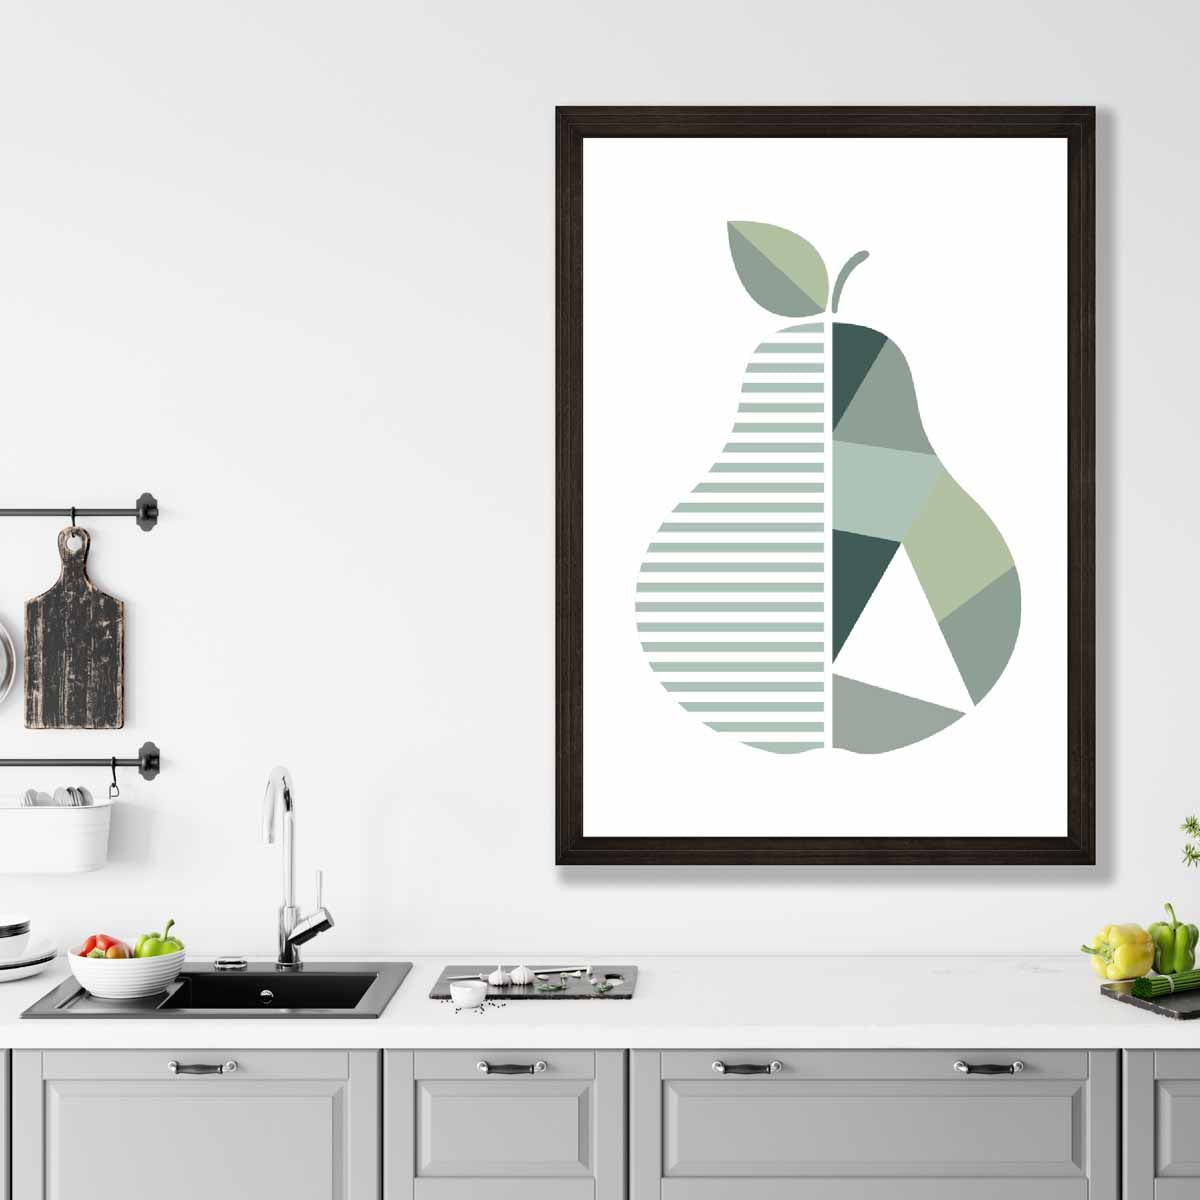 Geometric Fruit Poster of Pear in Sage green